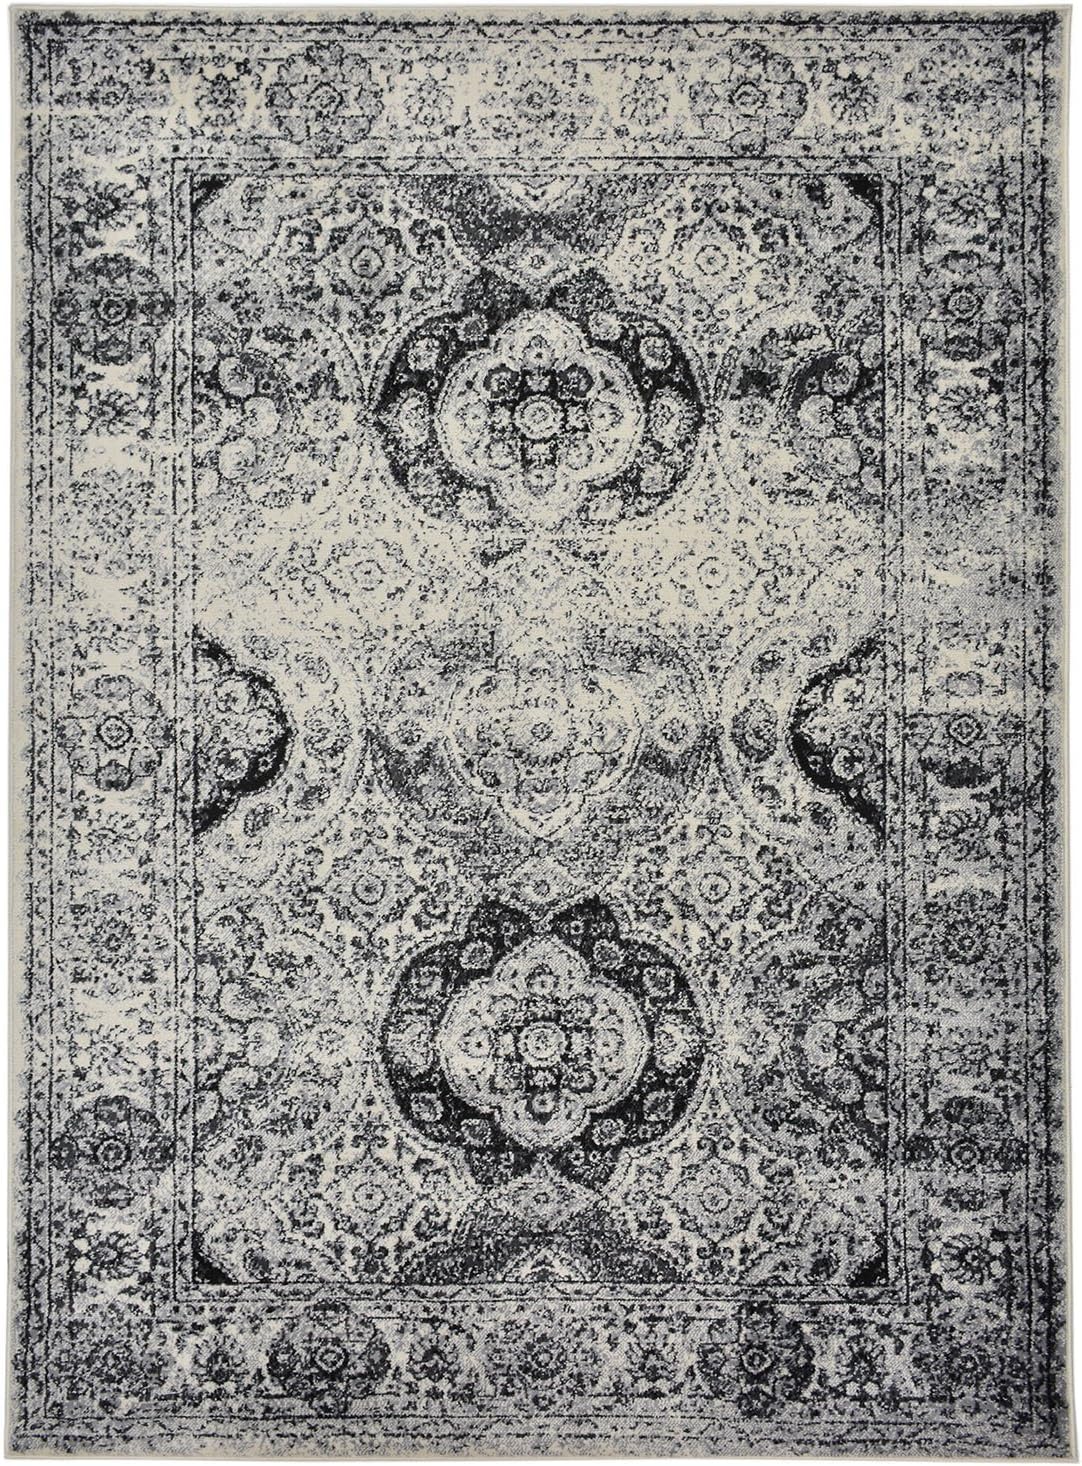 Studio Collection Vintage French Aubusson Design Contemporary Modern Area Rug (Aubusson Ivory Grey, 5 x 7)